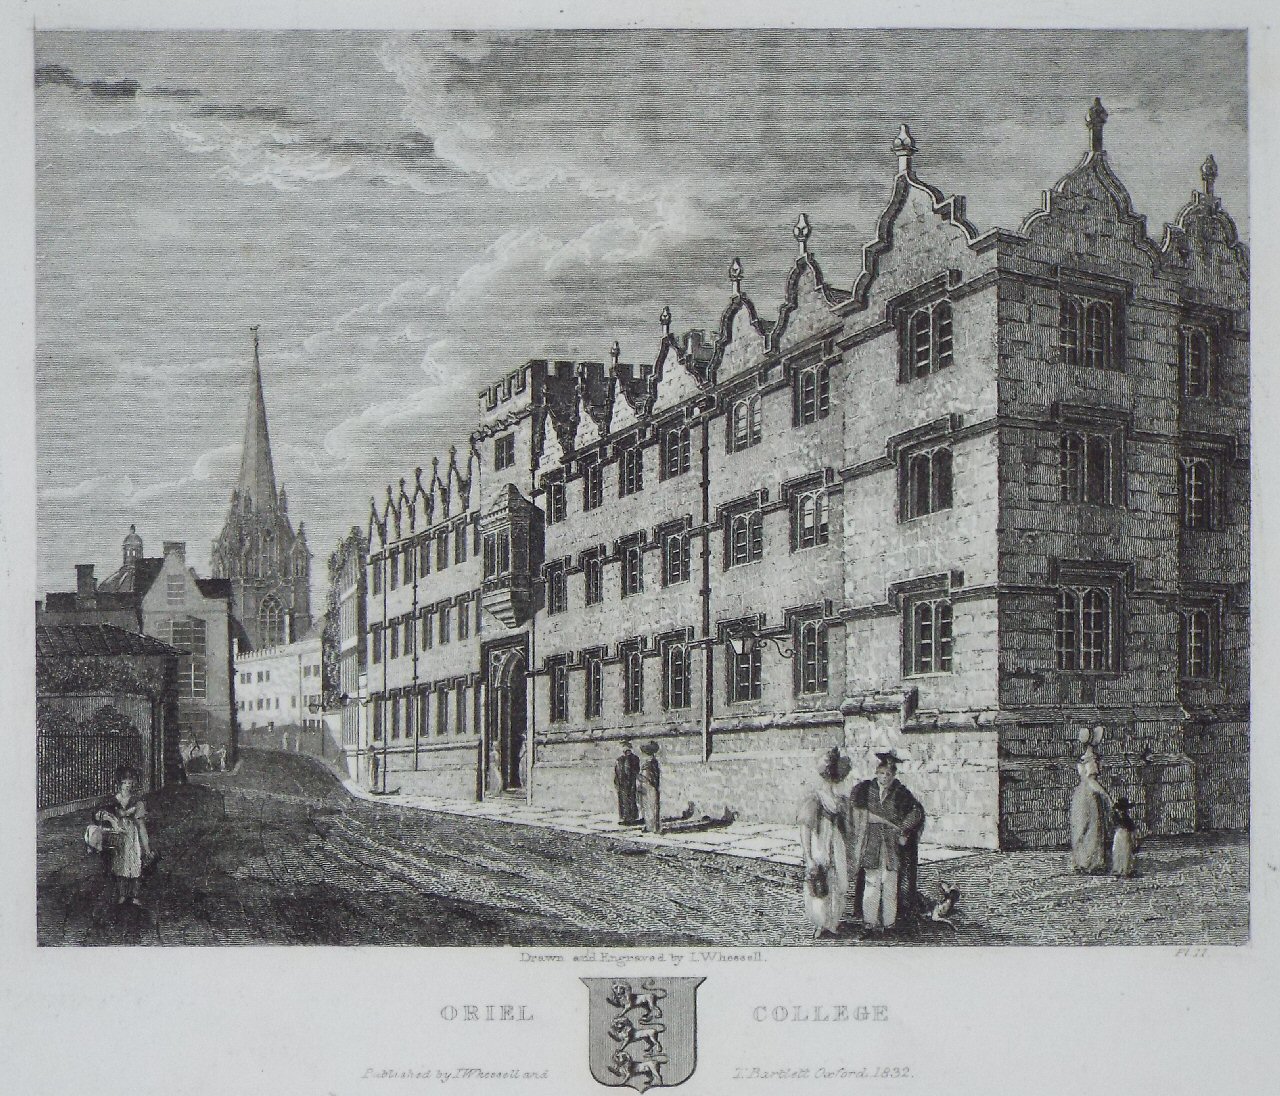 Print - Oriel College. - Whessell